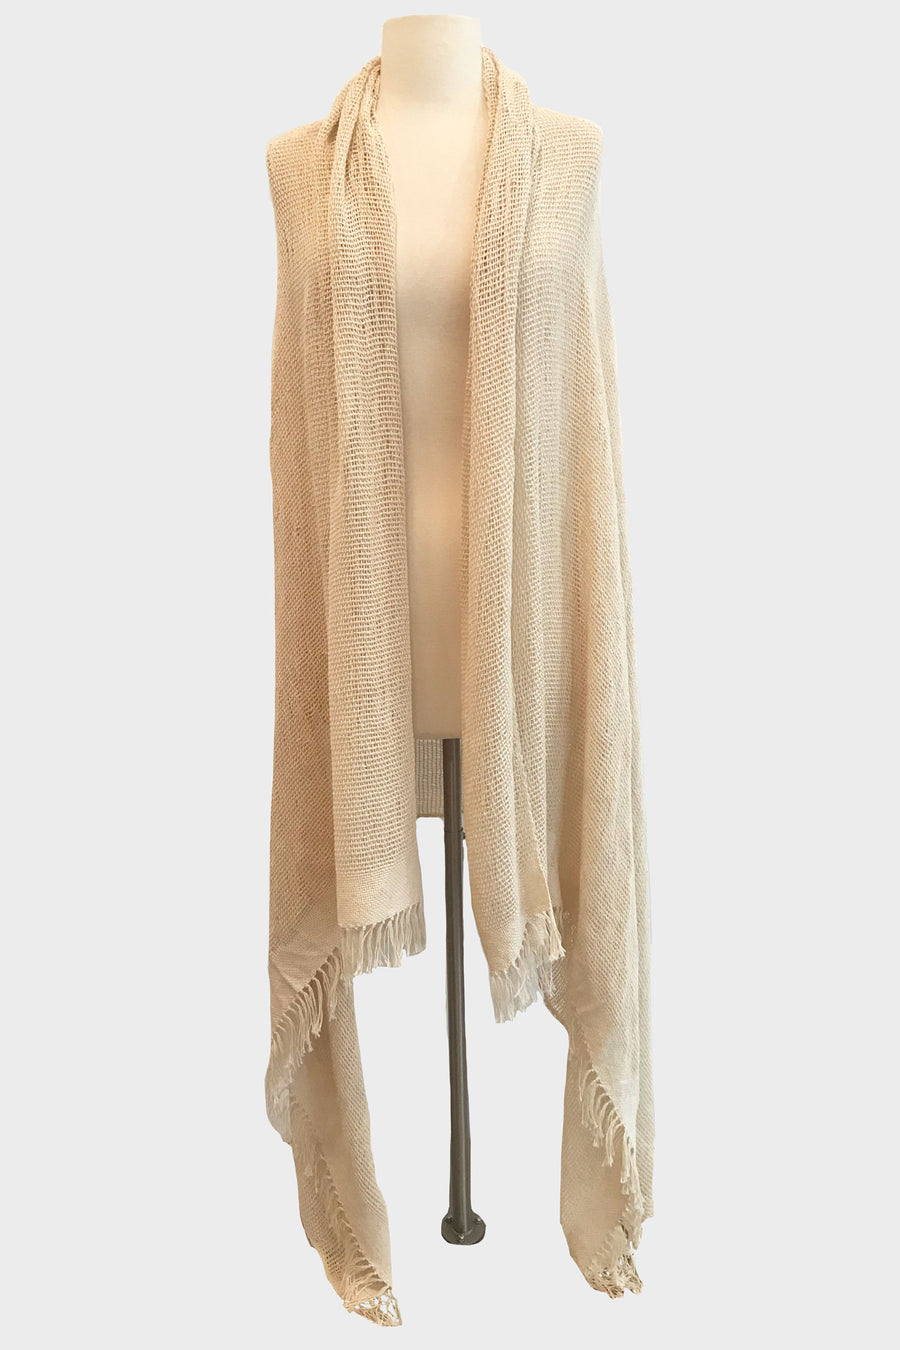 This is a photo of a natural-colored shawl on a mannequin. The shawl is open in the front and falls to the floor at the longest point.